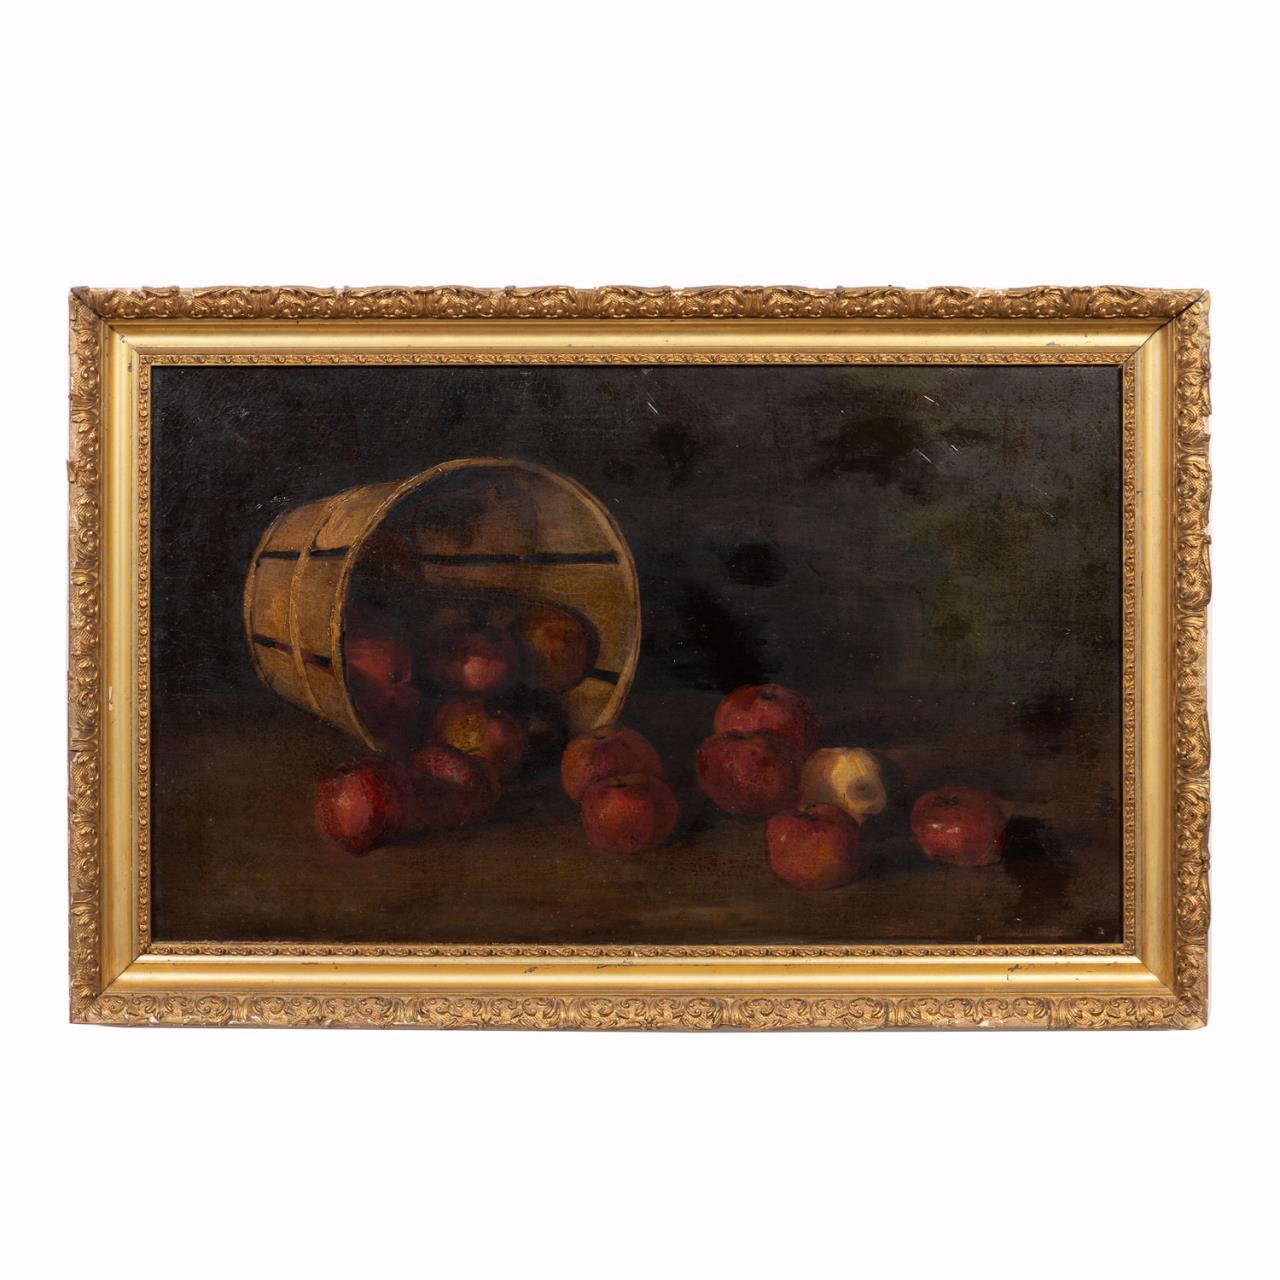 19TH C. "STILL LIFE BASKET WITH